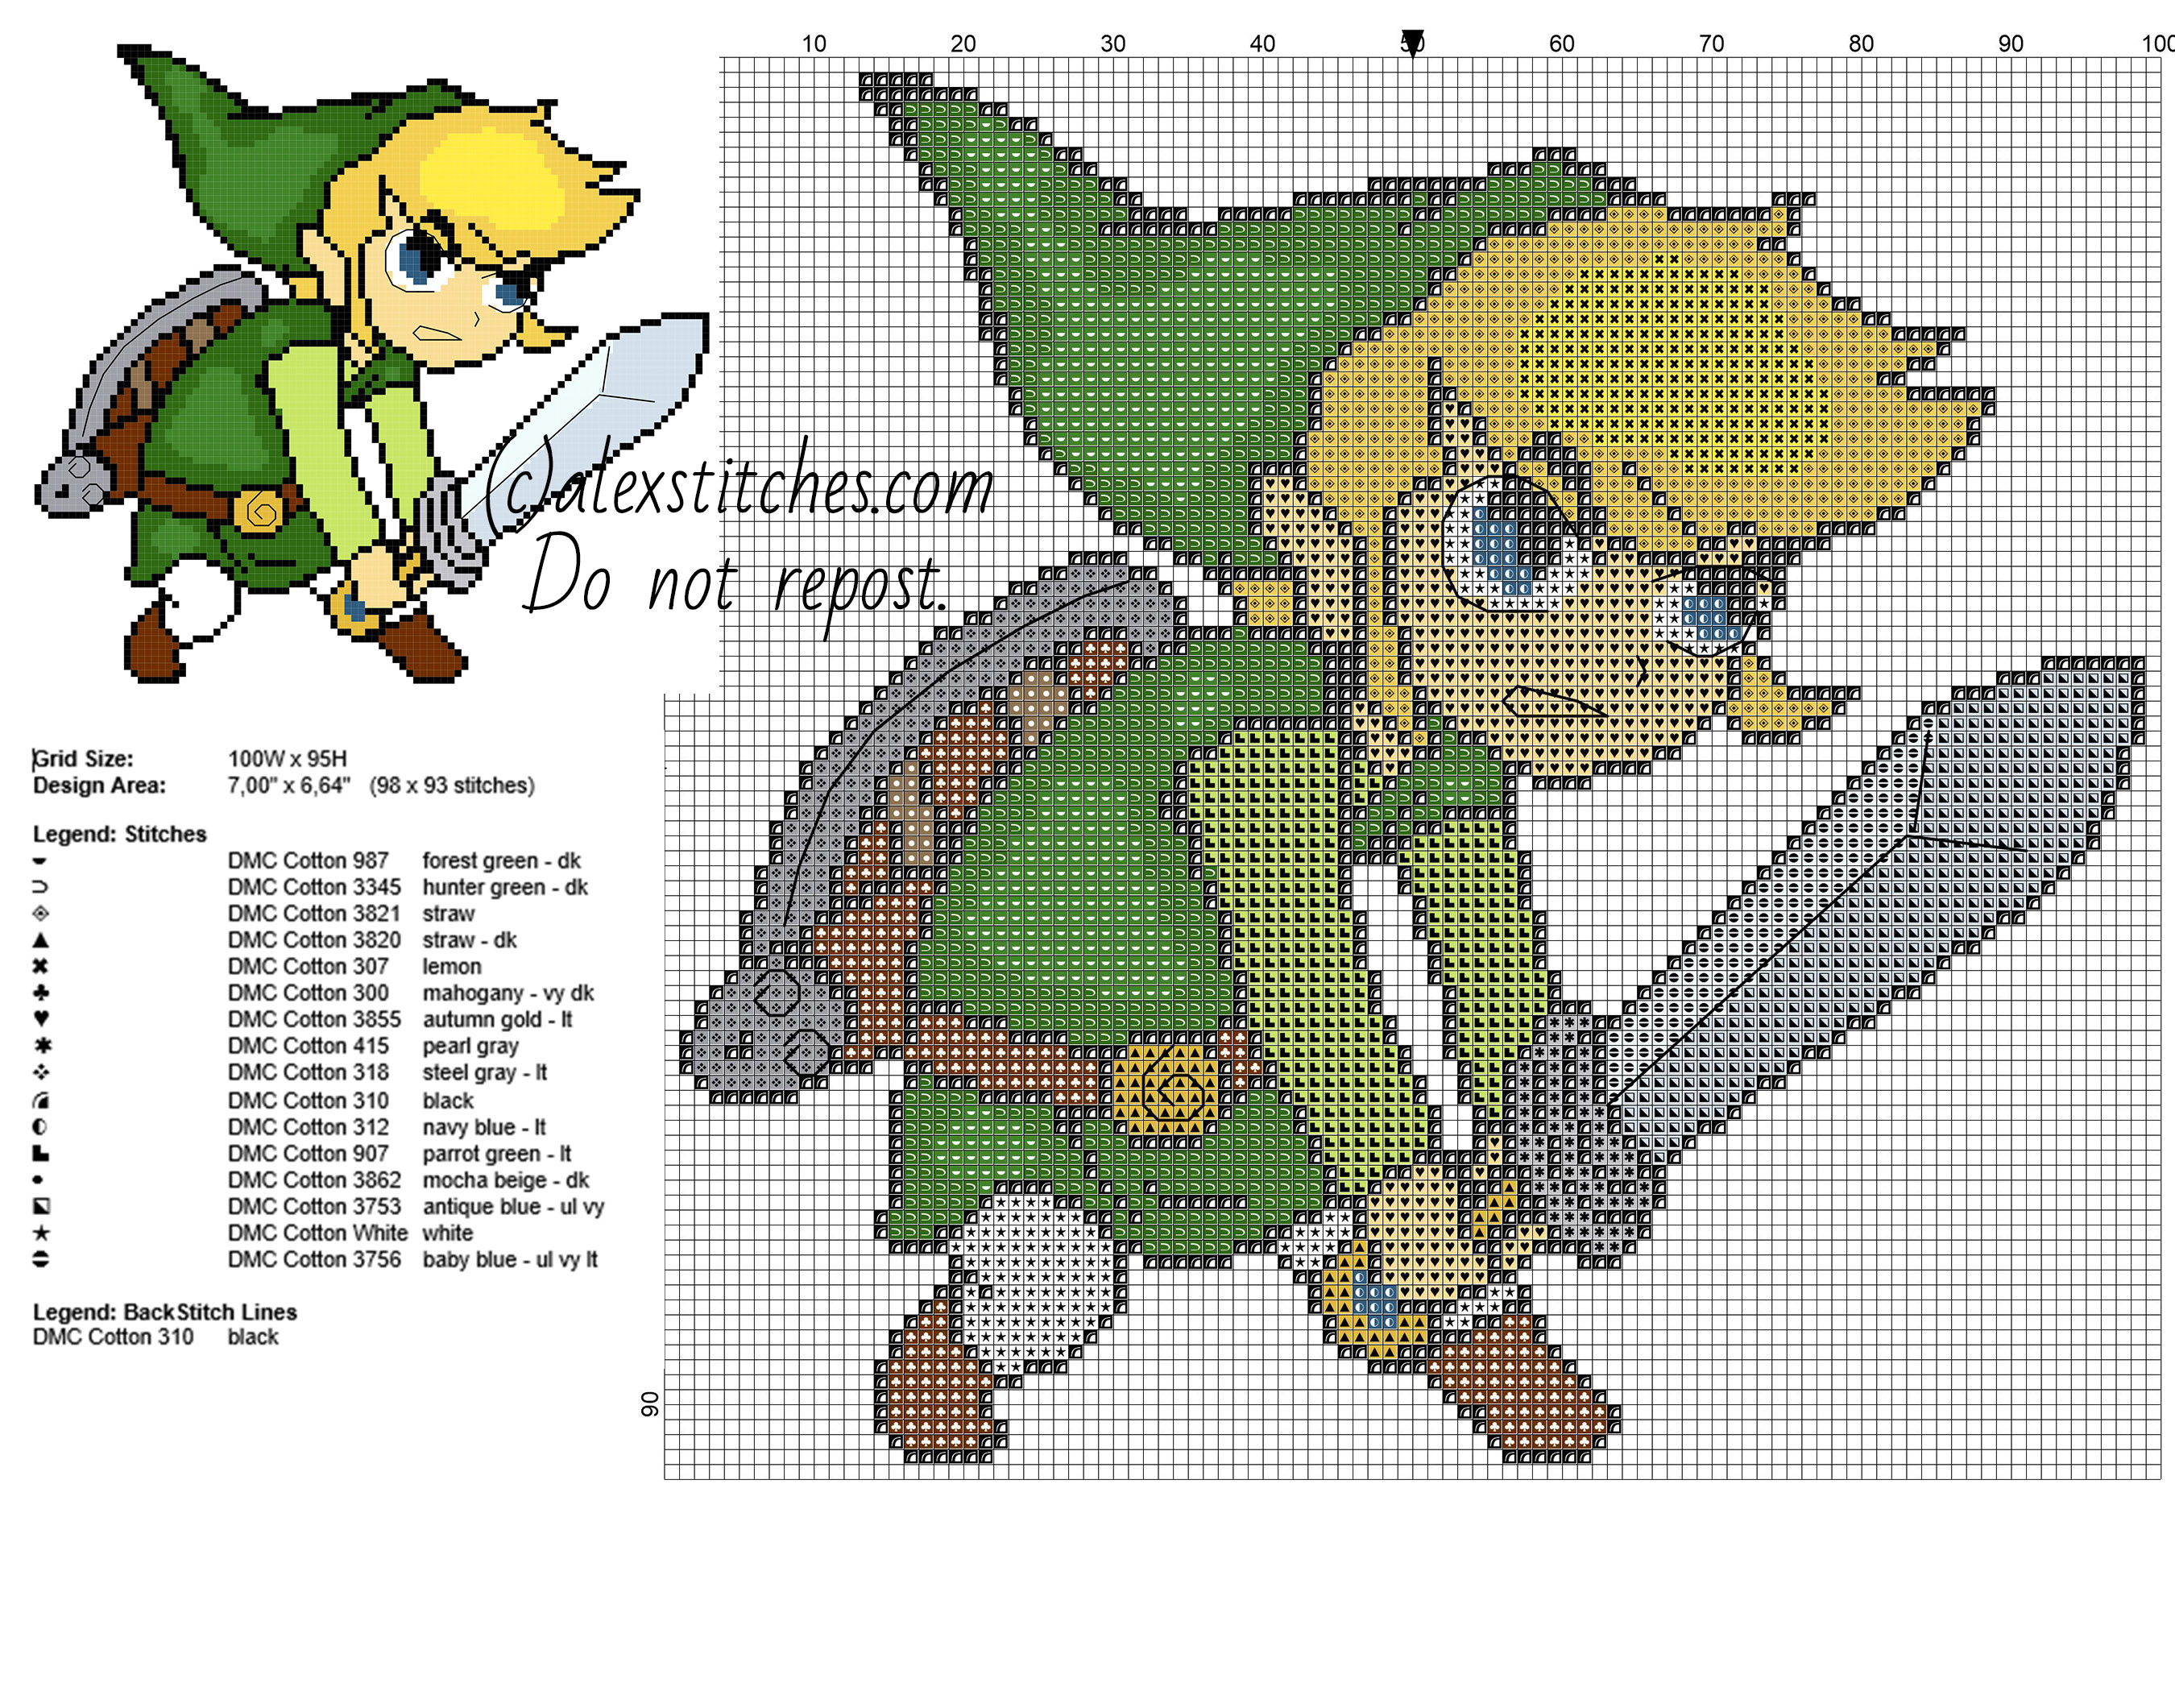 Link children with a sword character form The Legend of Zelda videogame free cross stitch pattern